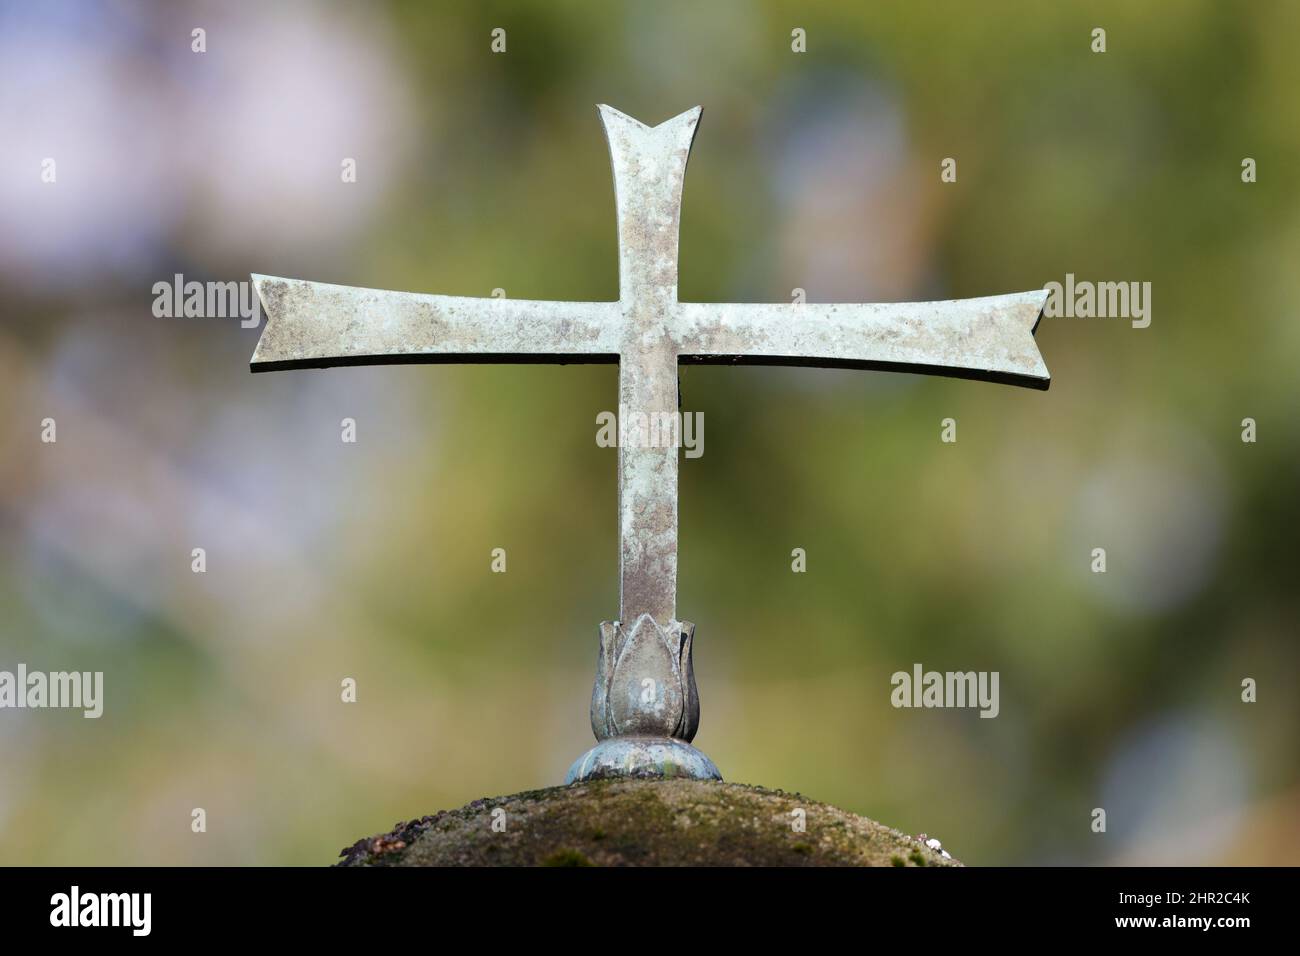 metal cross on a gravestone of a cemetery in front of blurred green background Stock Photo